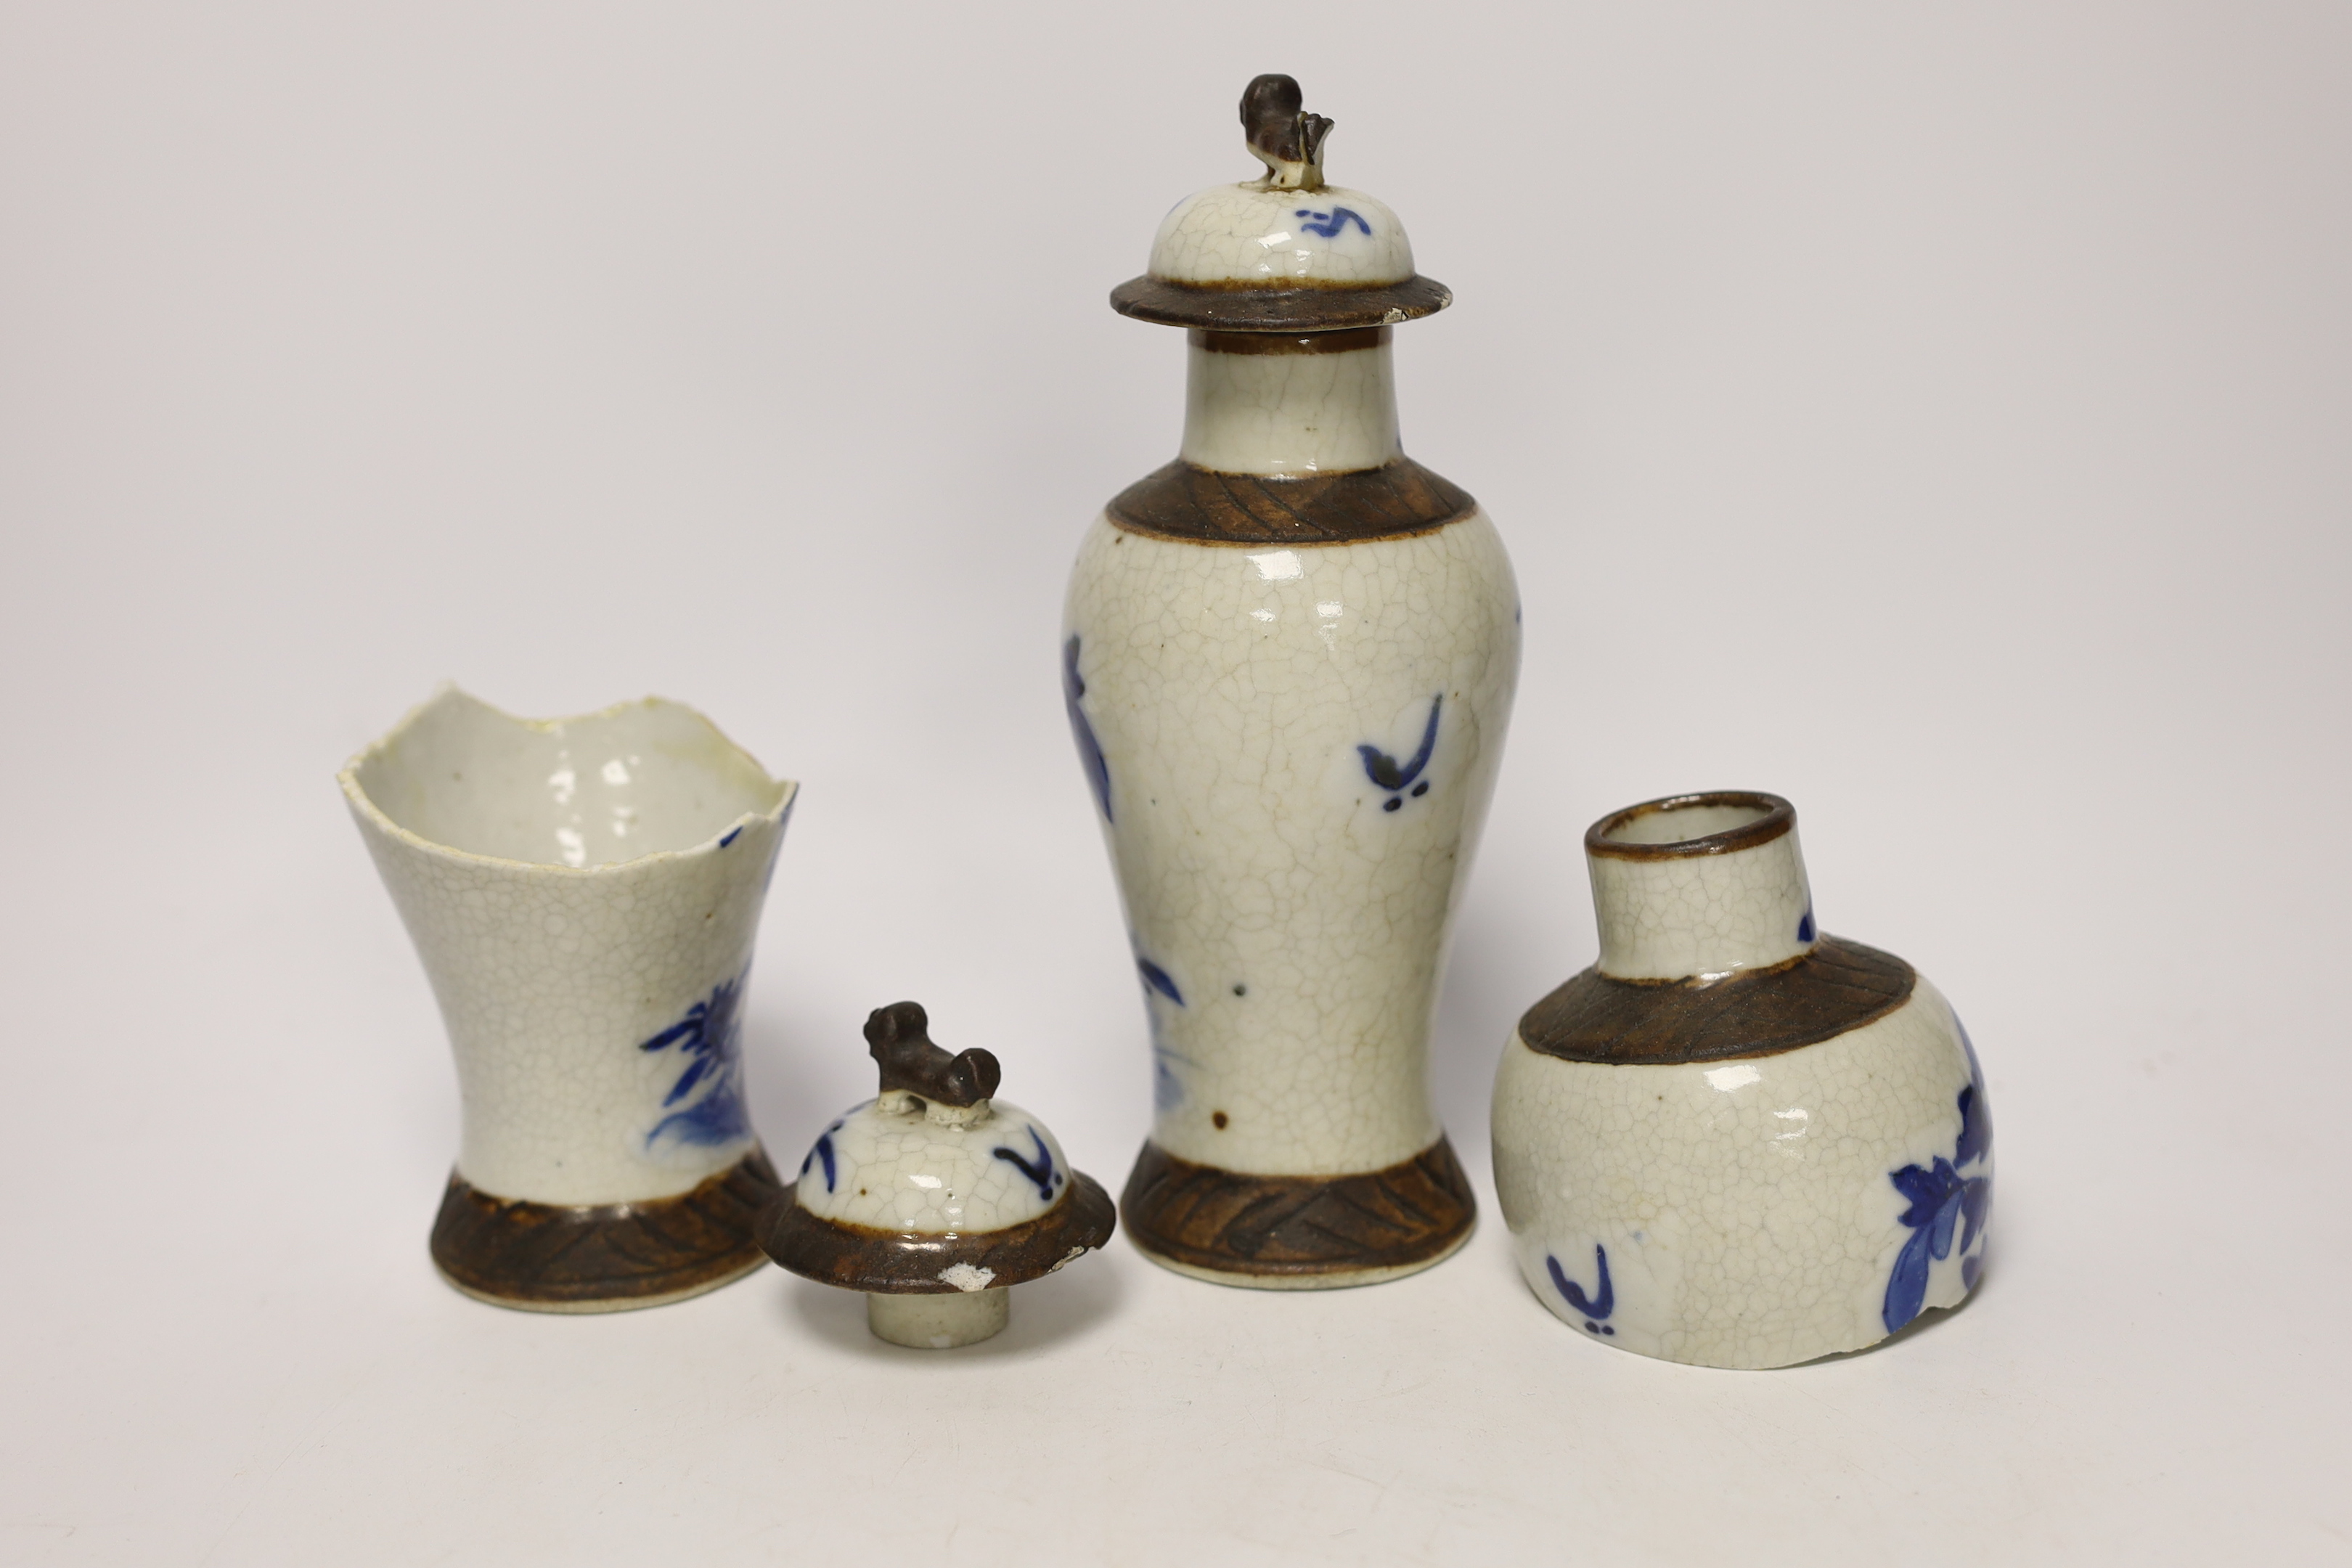 A pair of 19th century Chinese crackleware vases and covers, 15cm high (one badly broken)